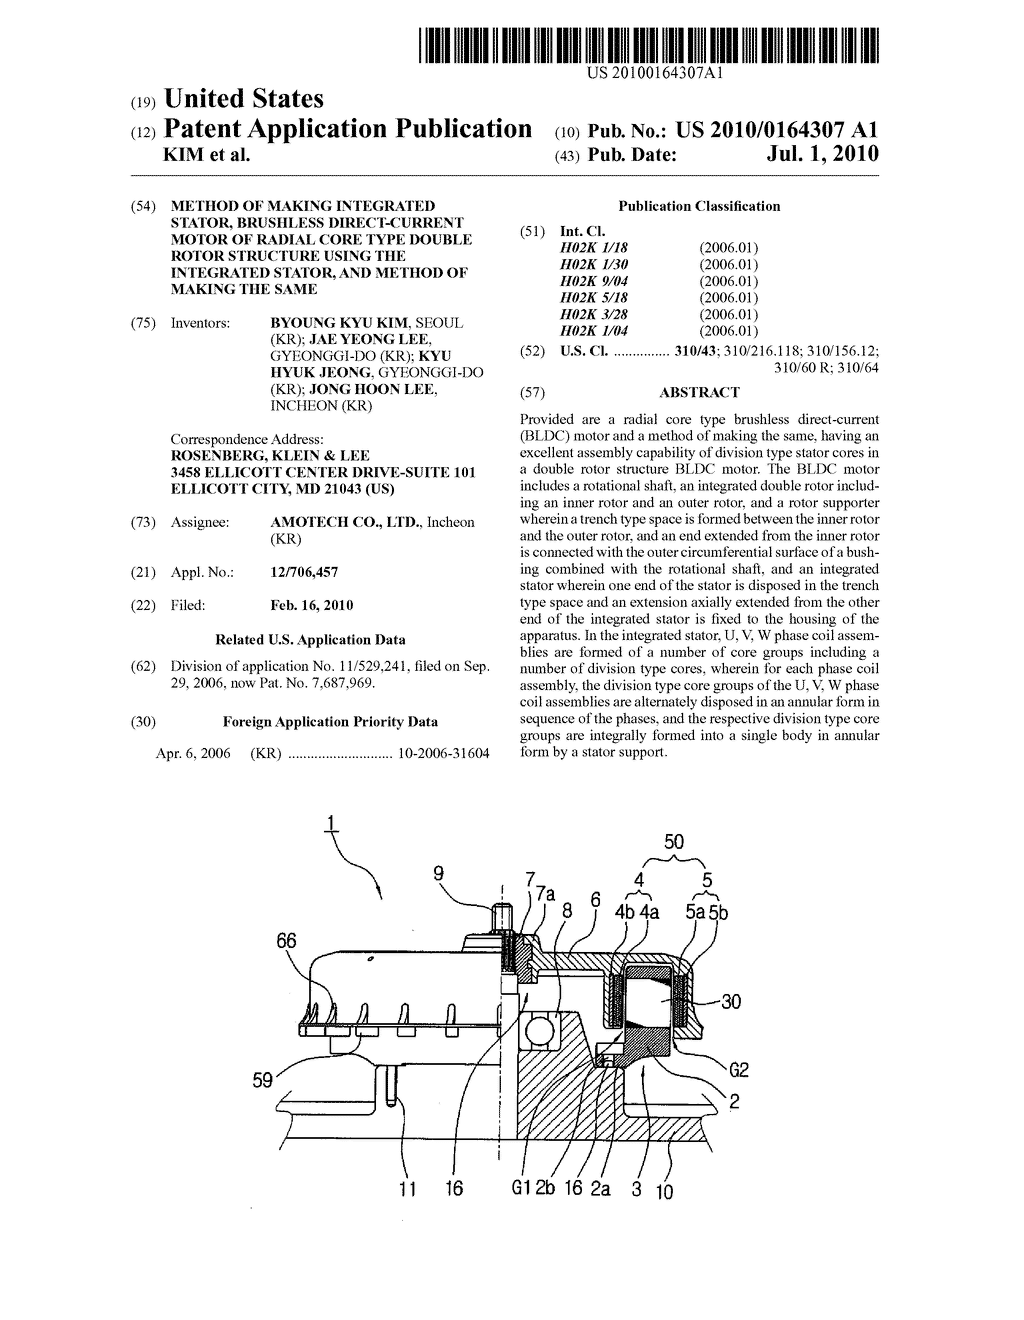 METHOD OF MAKING INTEGRATED STATOR, BRUSHLESS DIRECT-CURRENT MOTOR OF RADIAL CORE TYPE DOUBLE ROTOR STRUCTURE USING THE INTEGRATED STATOR, AND METHOD OF MAKING THE SAME - diagram, schematic, and image 01